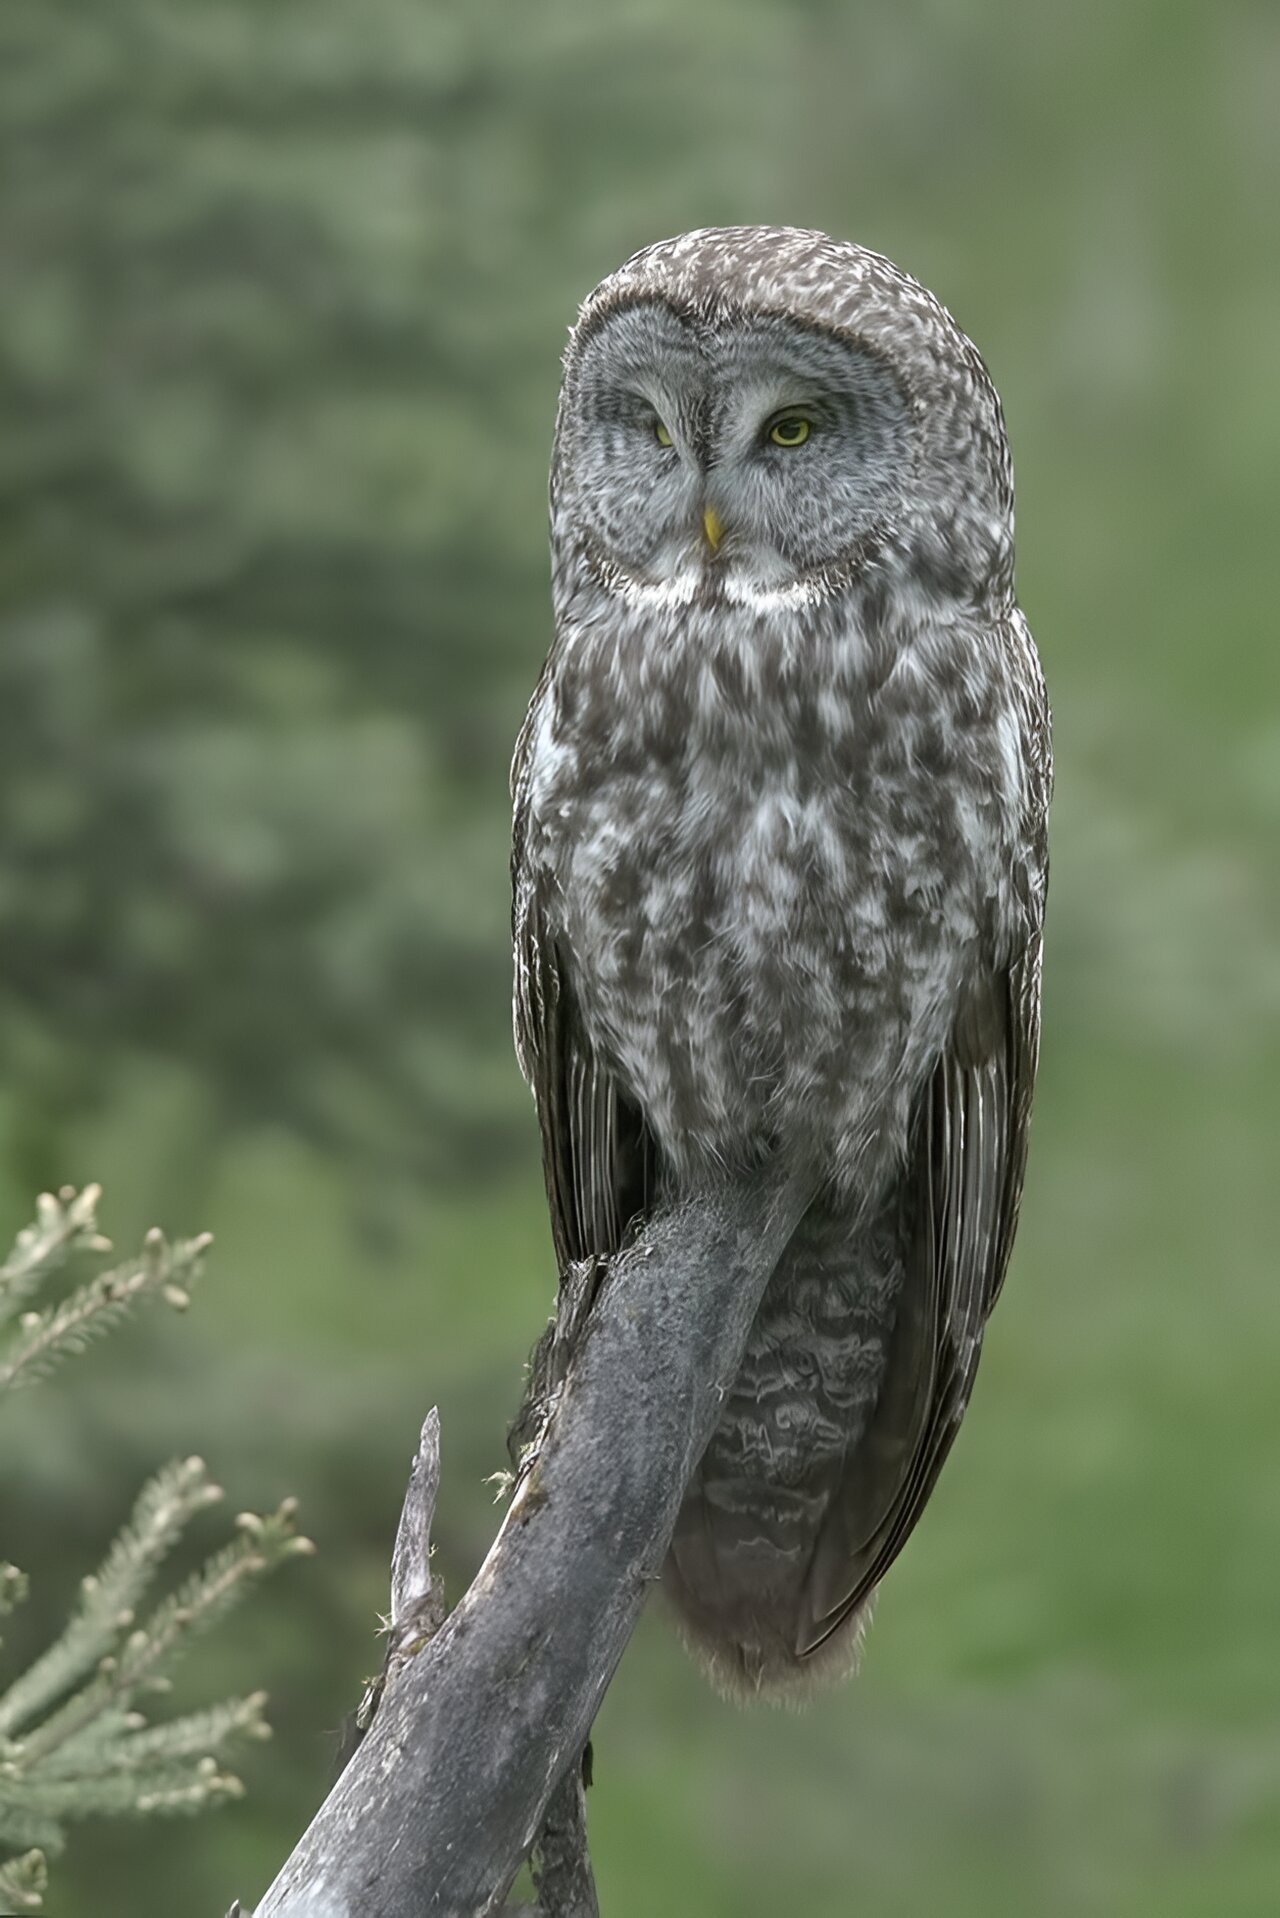 Machine learning provides a new picture of the great gray owl